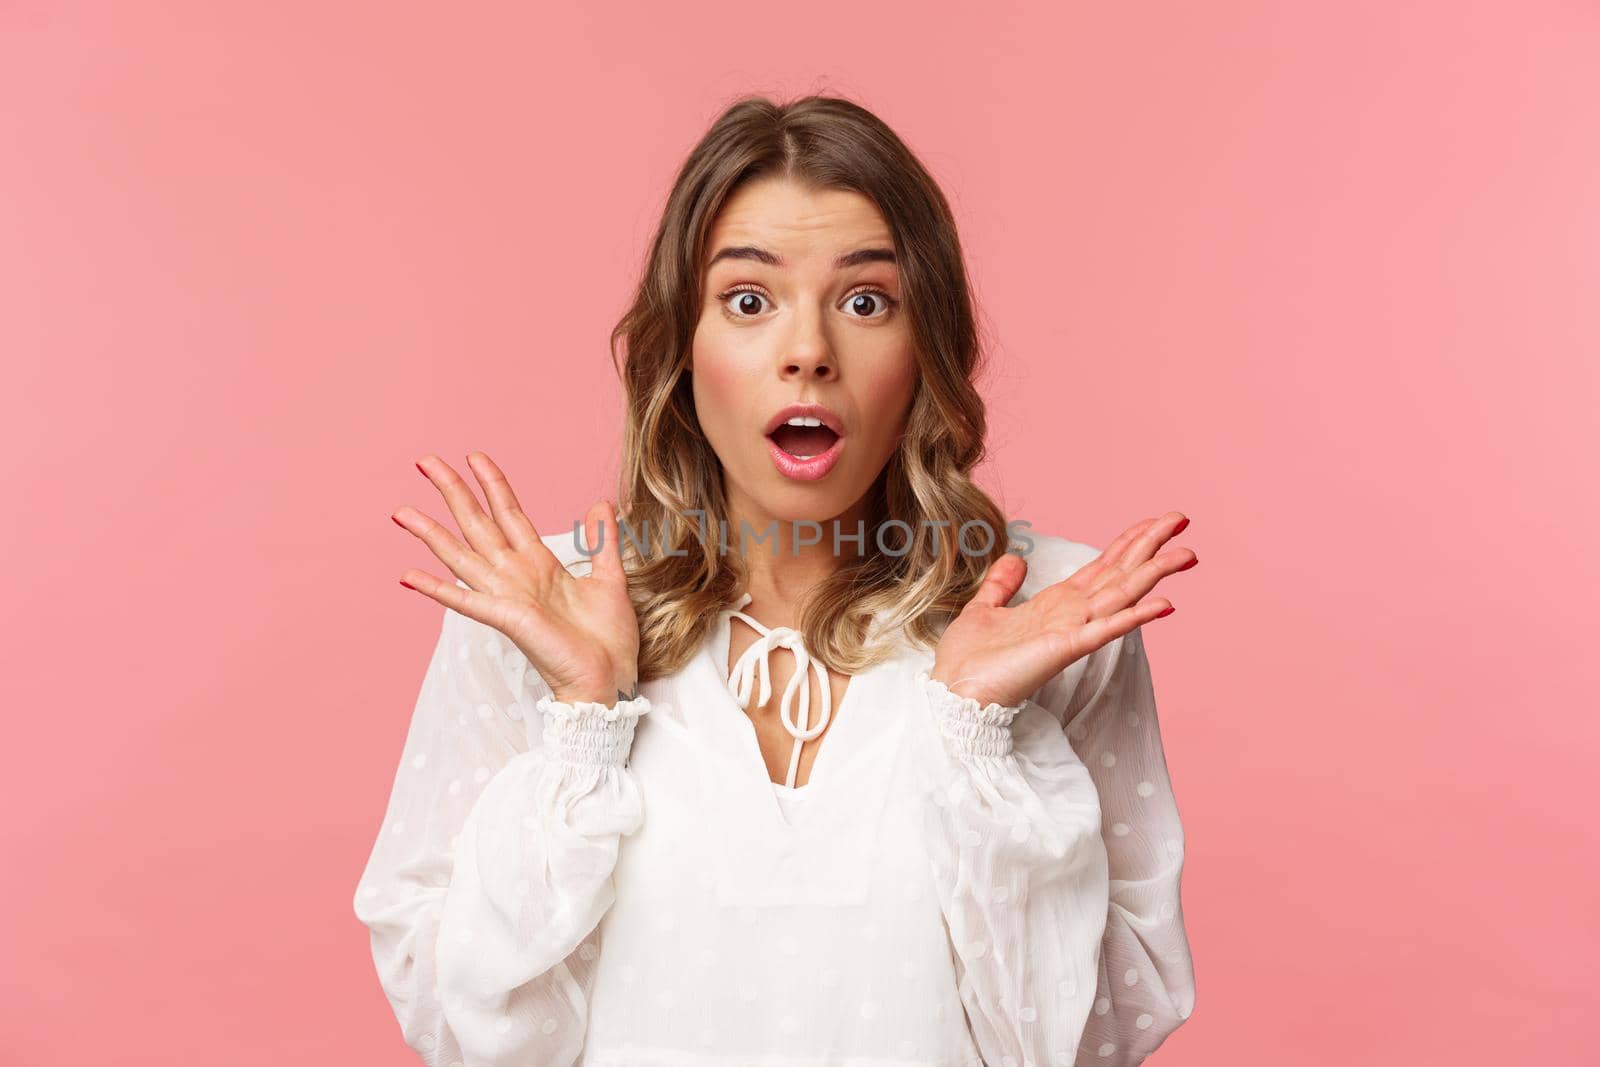 Close-up portrait of impressed and surprised blond girl hear something stunning and impressive happened, drop jaw spread hands sideways, look astonished with news, pink background.